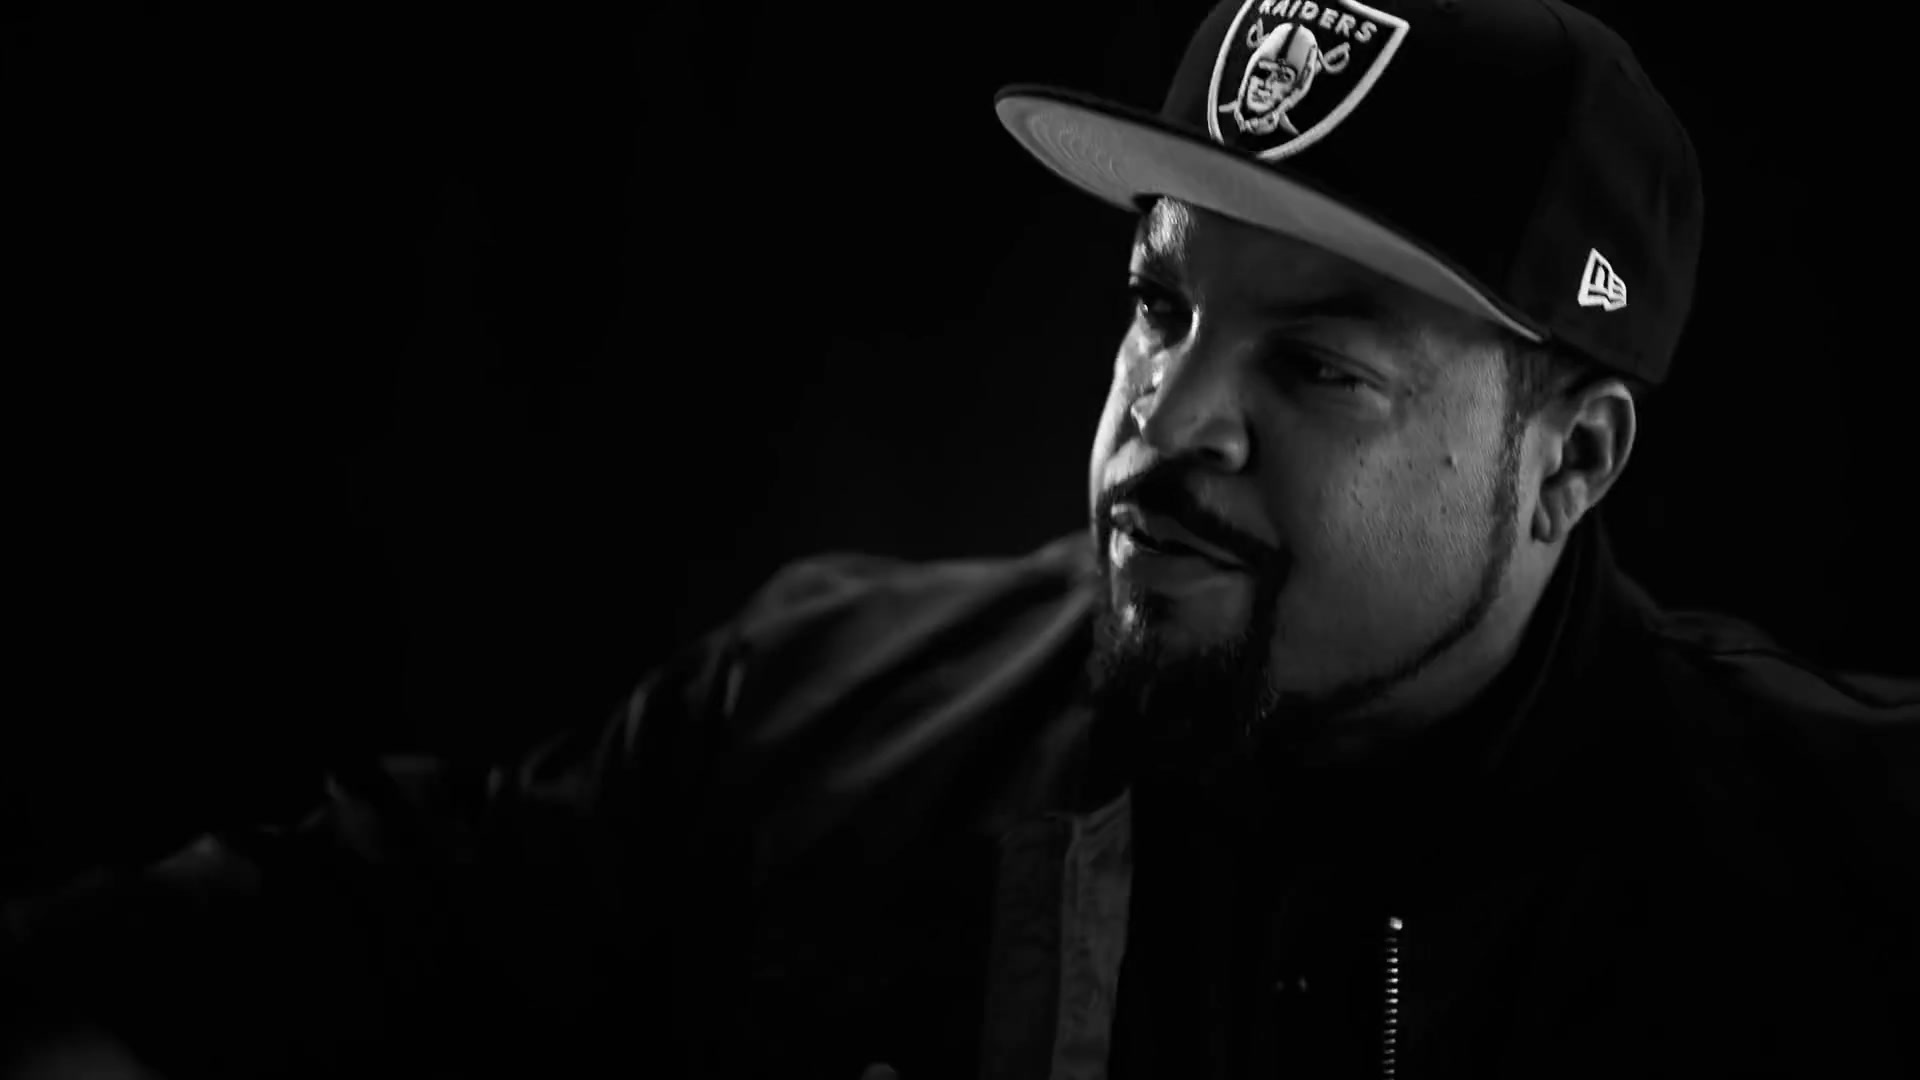 New Era X Oakland Raiders Cap Worn By Ice Cube In Ain't Got No Haters (2019)